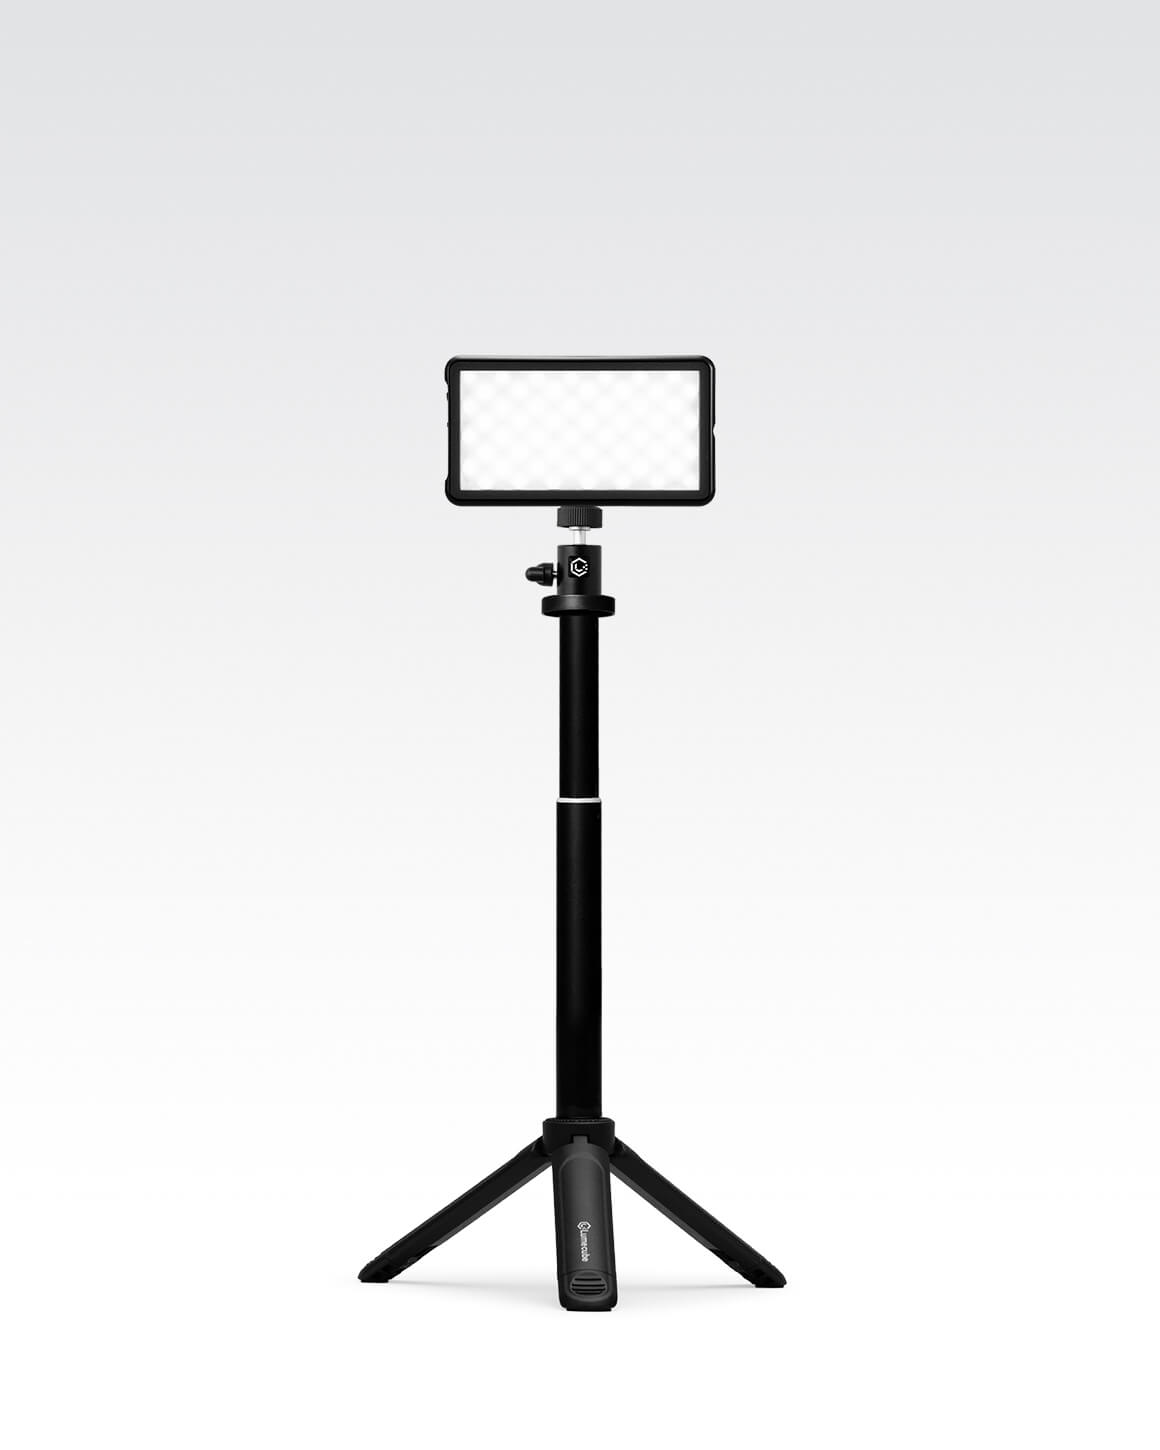 Collapsible and portable Lume Cube Broadcast Lighting Kit with black metal adjustable stand and bicolor LED Panel Go.